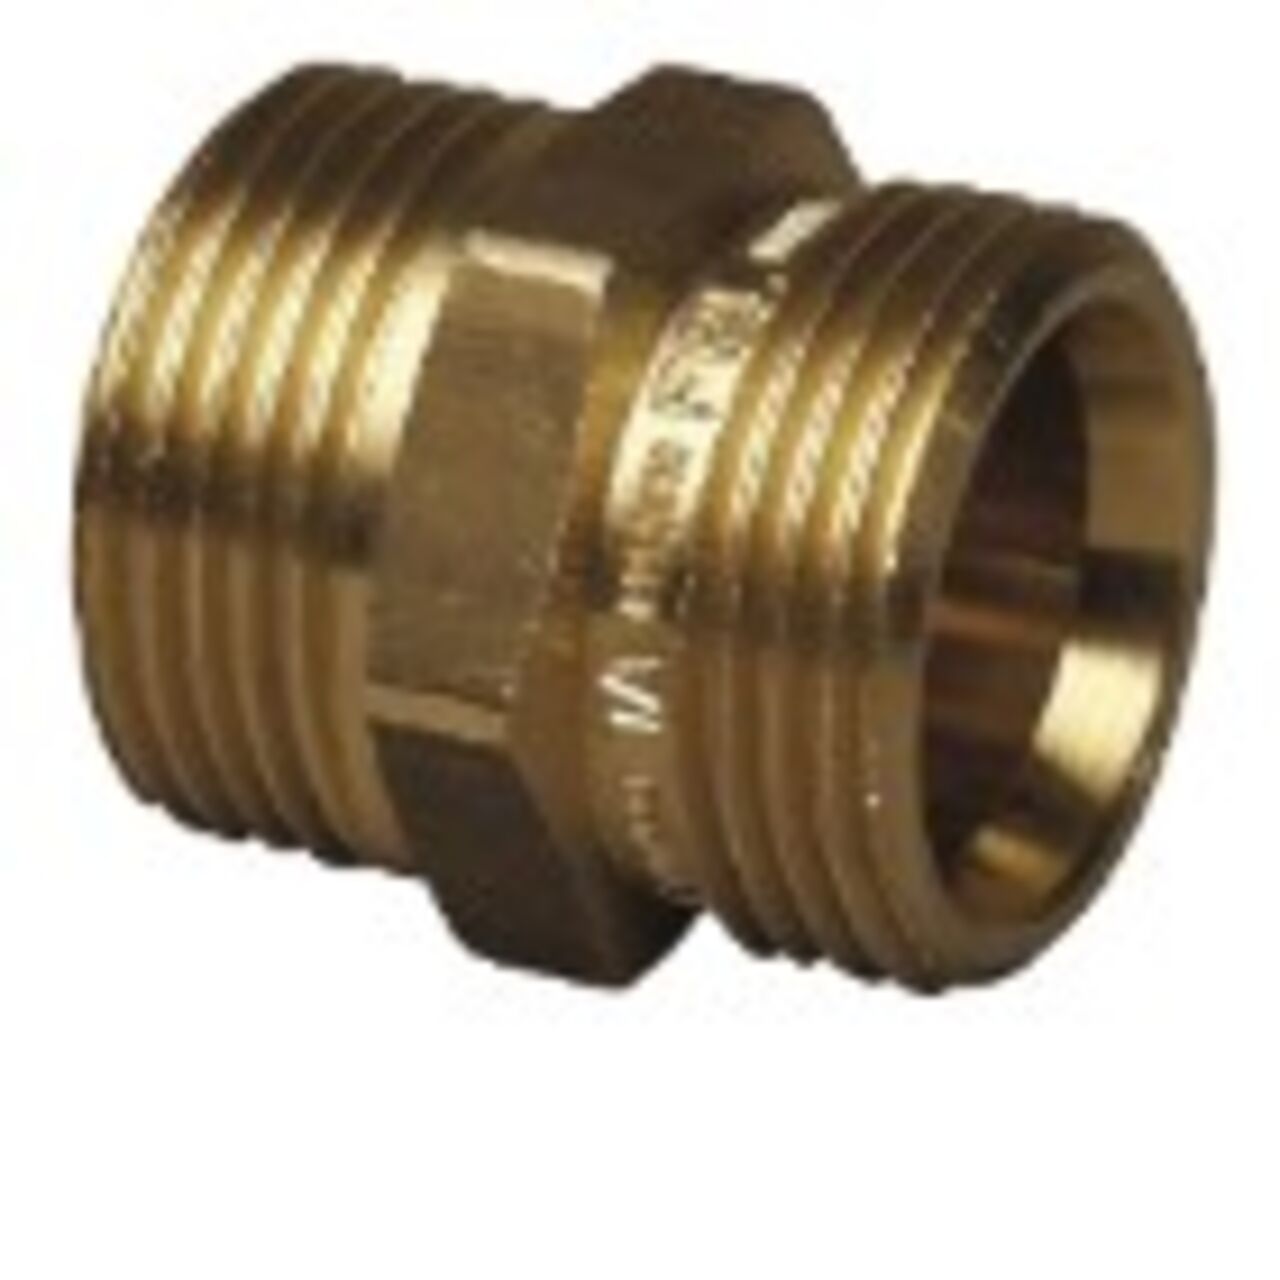 Uponor Nippel dobbel 1/2" x 1/2" 1